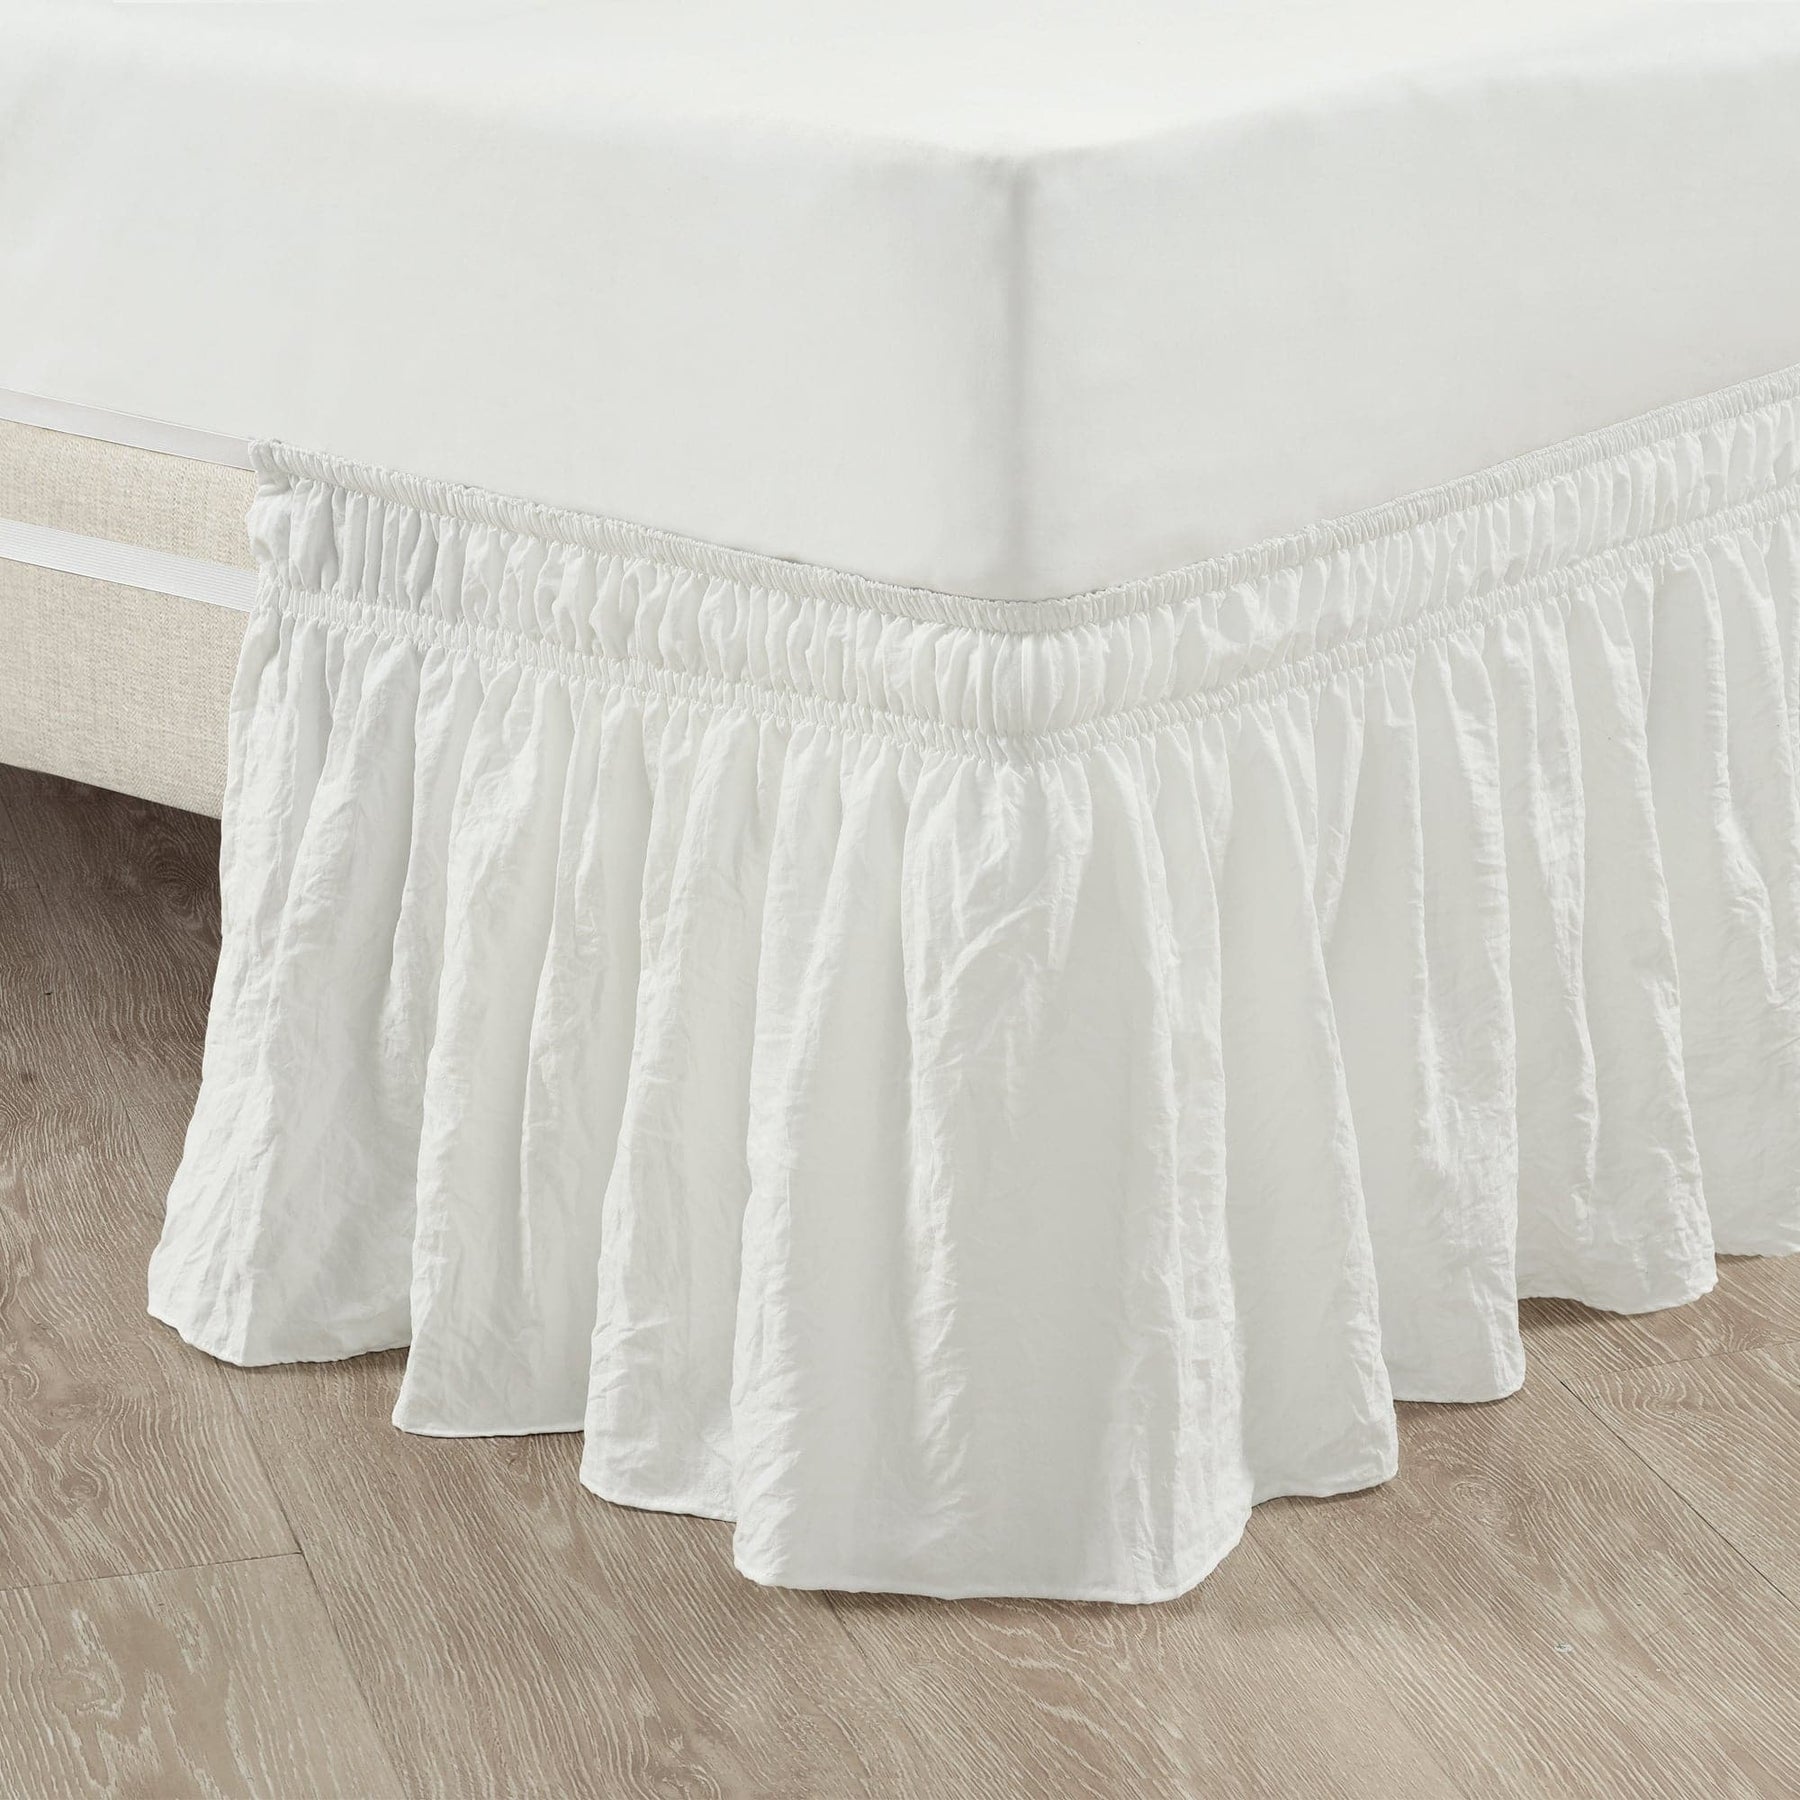  Christmas Bed Skirt Queen Size 16 Inch Drop, Adjustable &  Elastic Wrap Around Bed Skirts Pleated Luxury Dust Ruffles for Twin Full  Queen Cal King Base Bed, Forest Snowy Elk Xmas